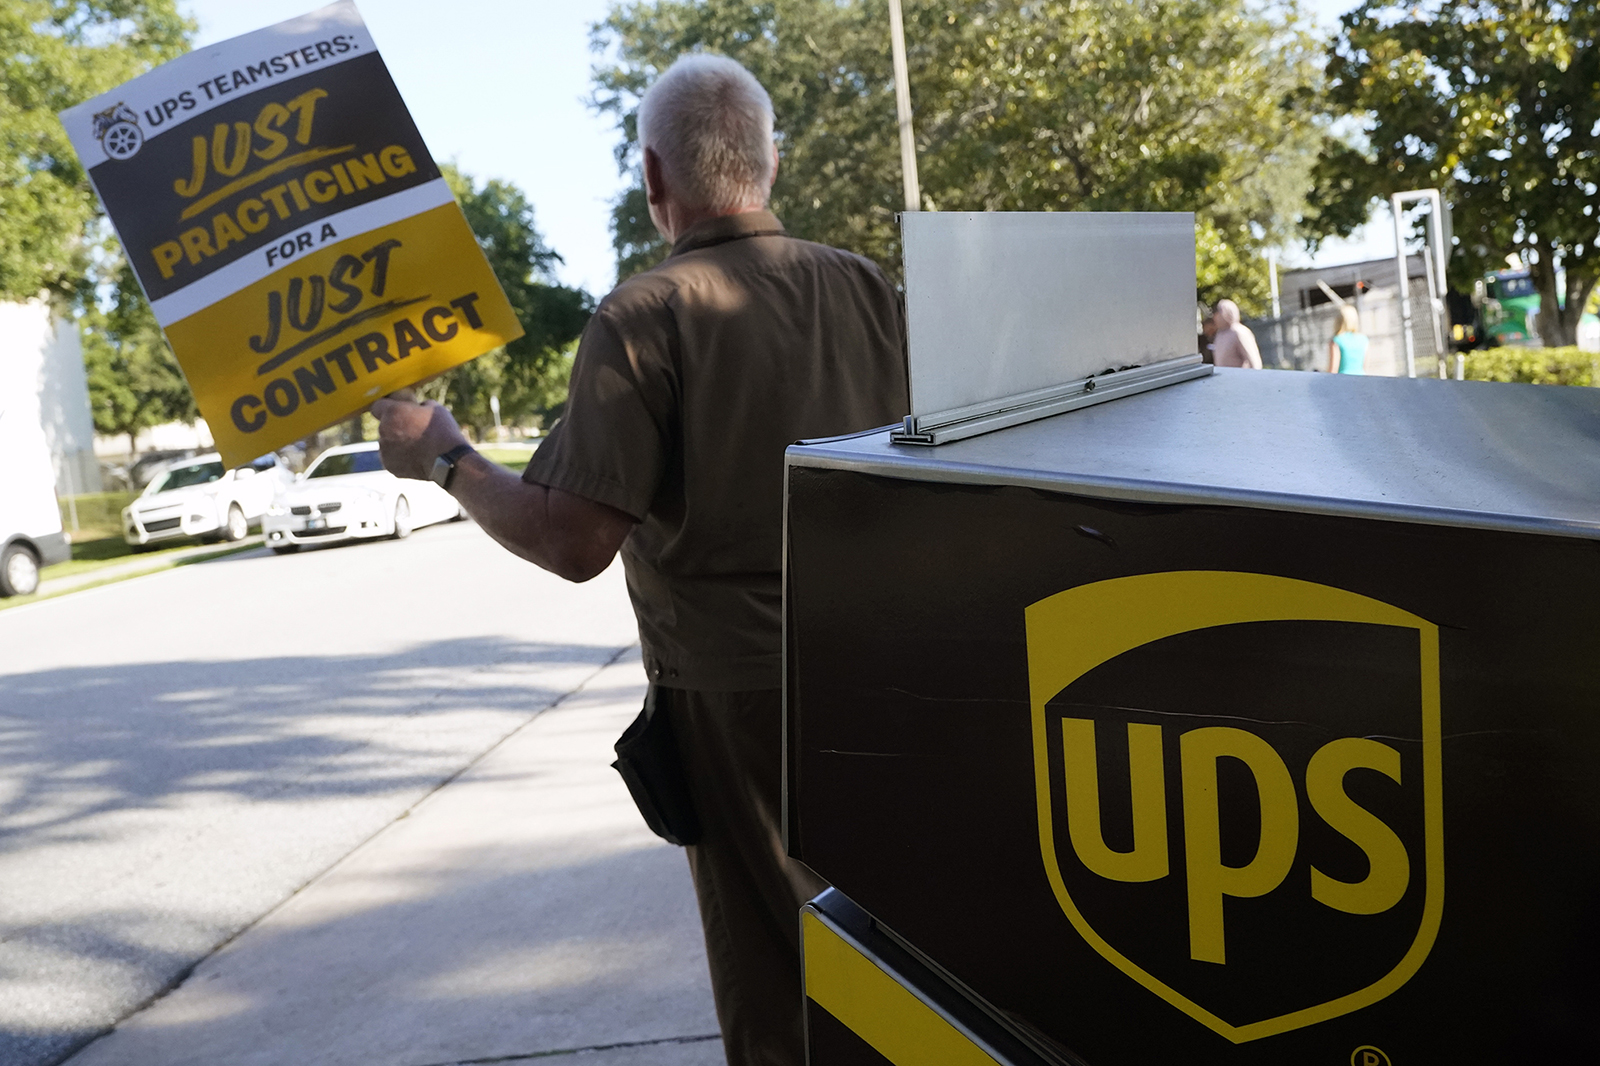 UPS workers go through a rehearsal of a pending strike at the UPS Customer Center on July 13 in Longwood, FL.